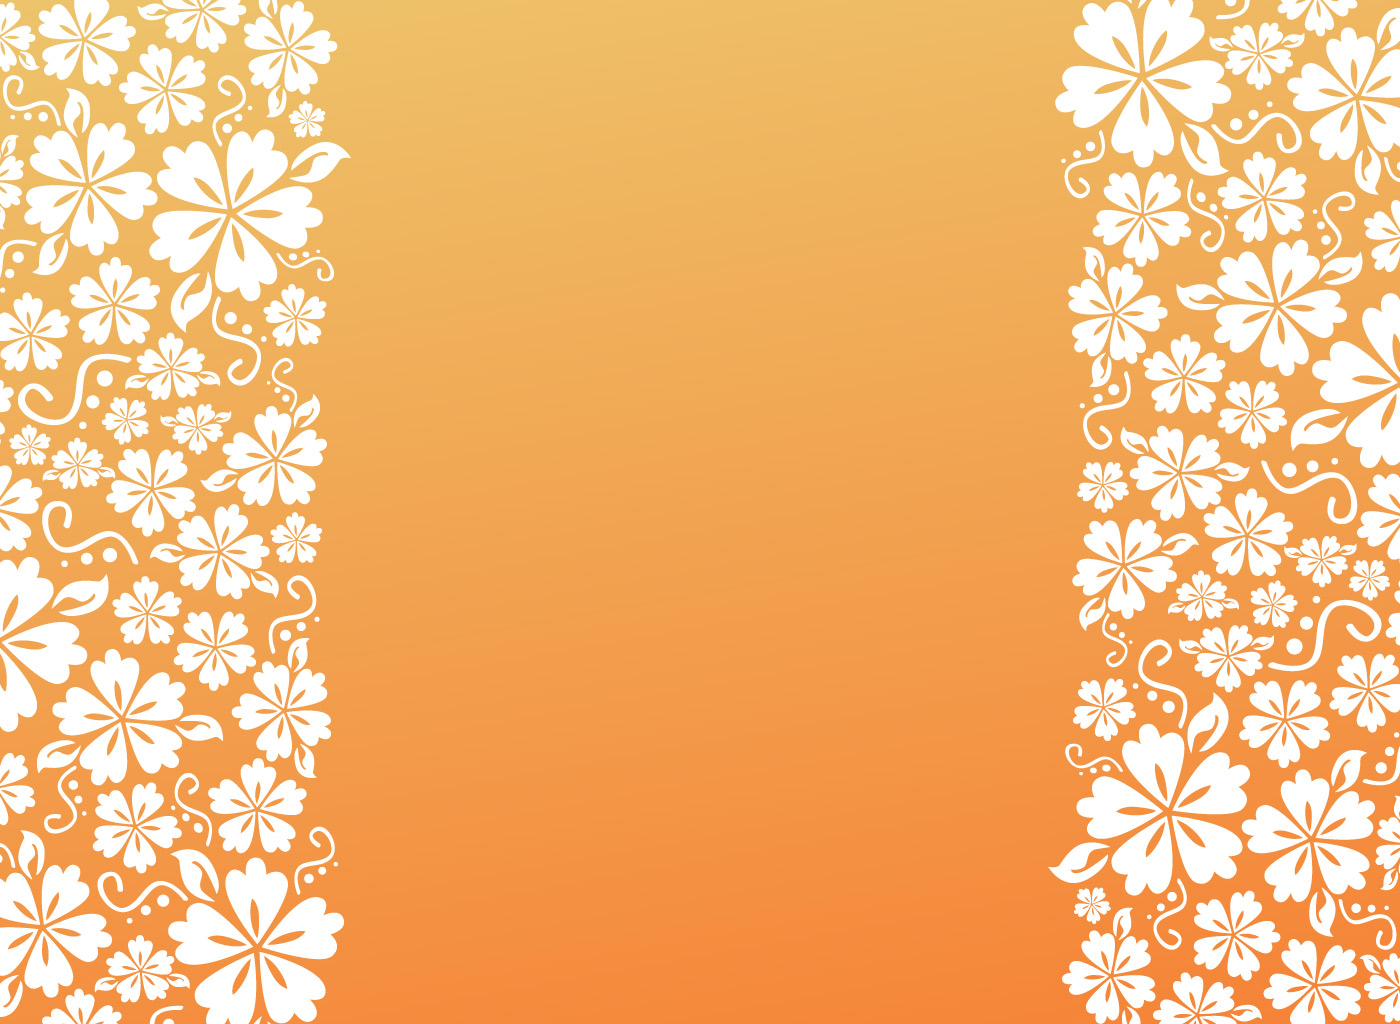 Don\'t you just love the color orange and cute flowers? This lovely orange background with cute flowers is perfect for you! The bright orange color will give your project a pop of color, while the cute flowers will add a touch of elegance and sweetness.